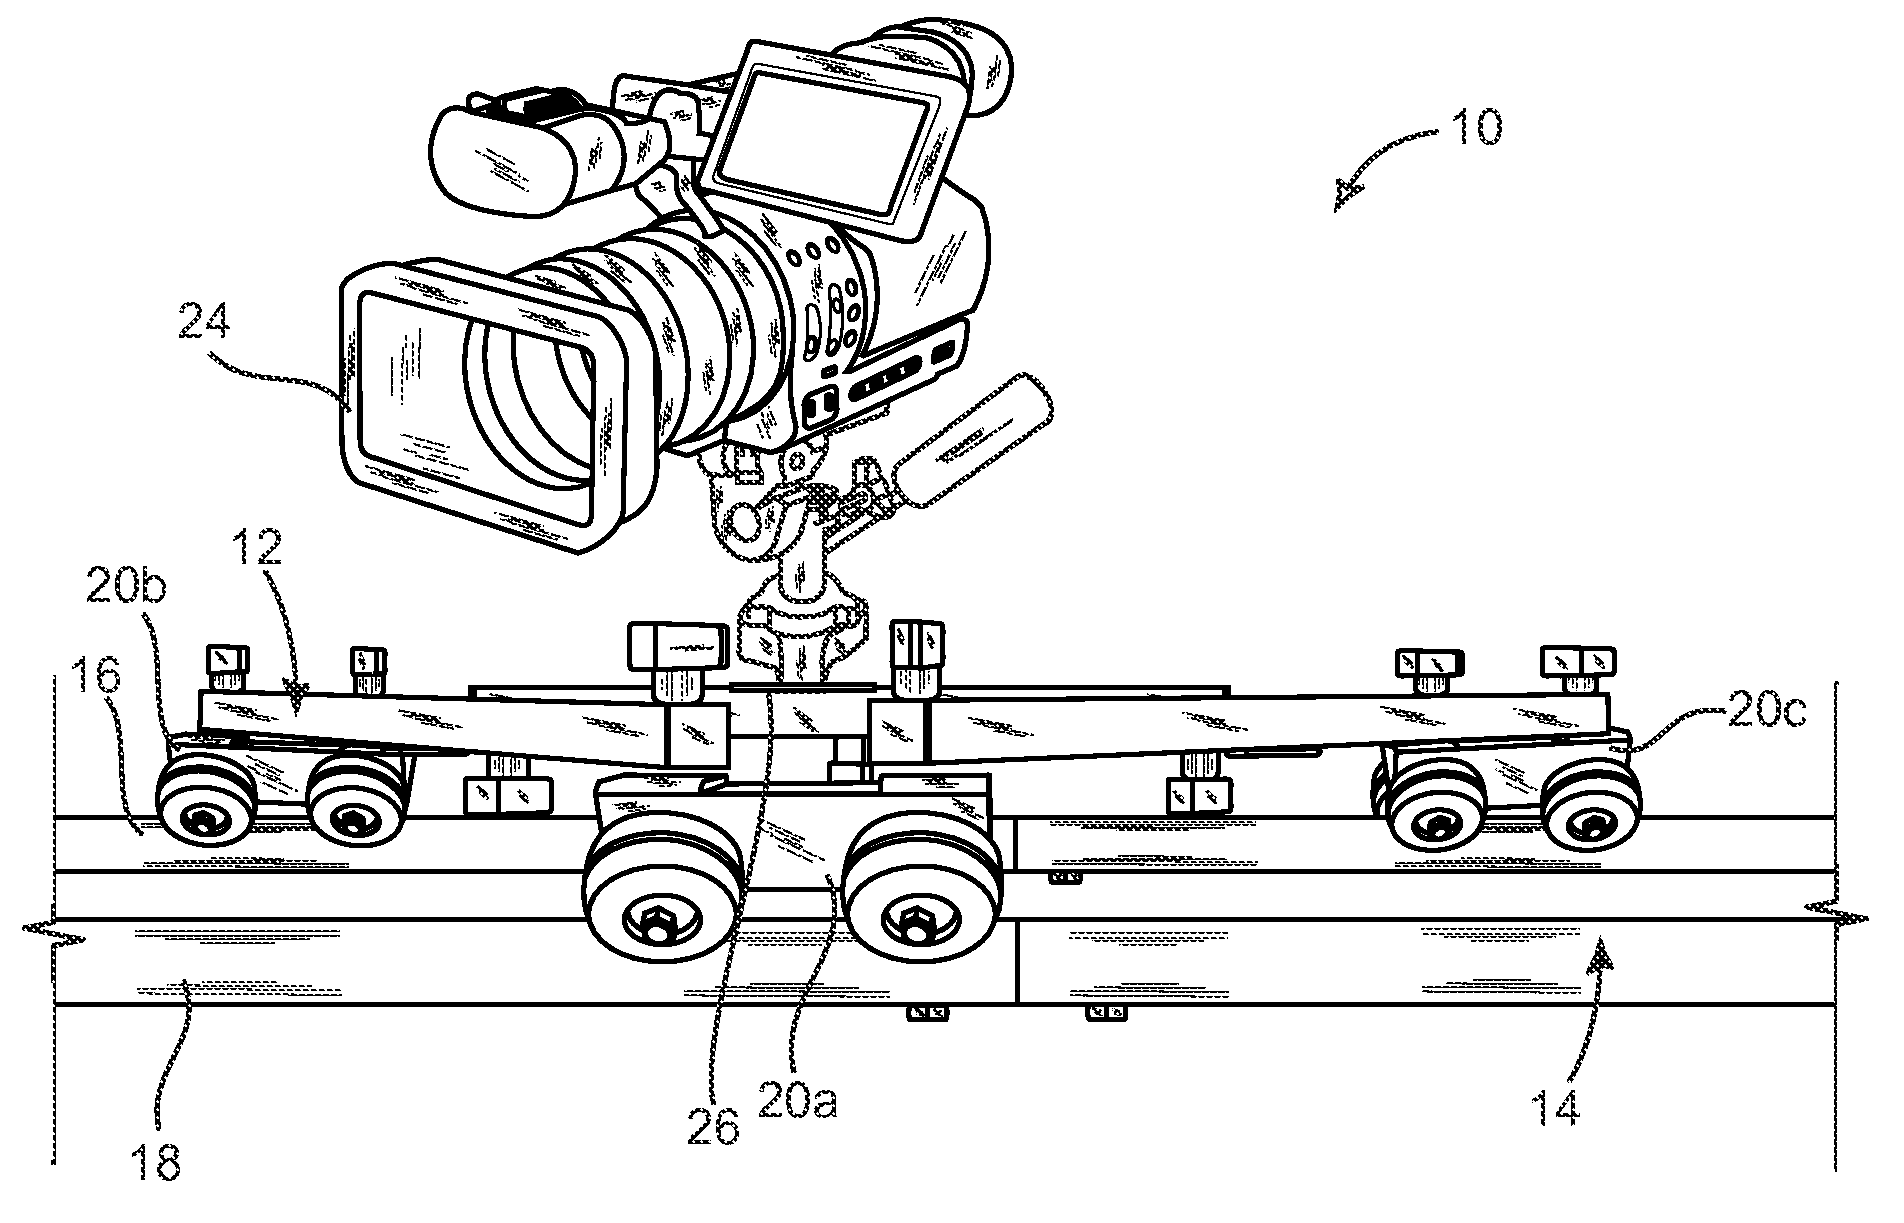 Dolly and track system